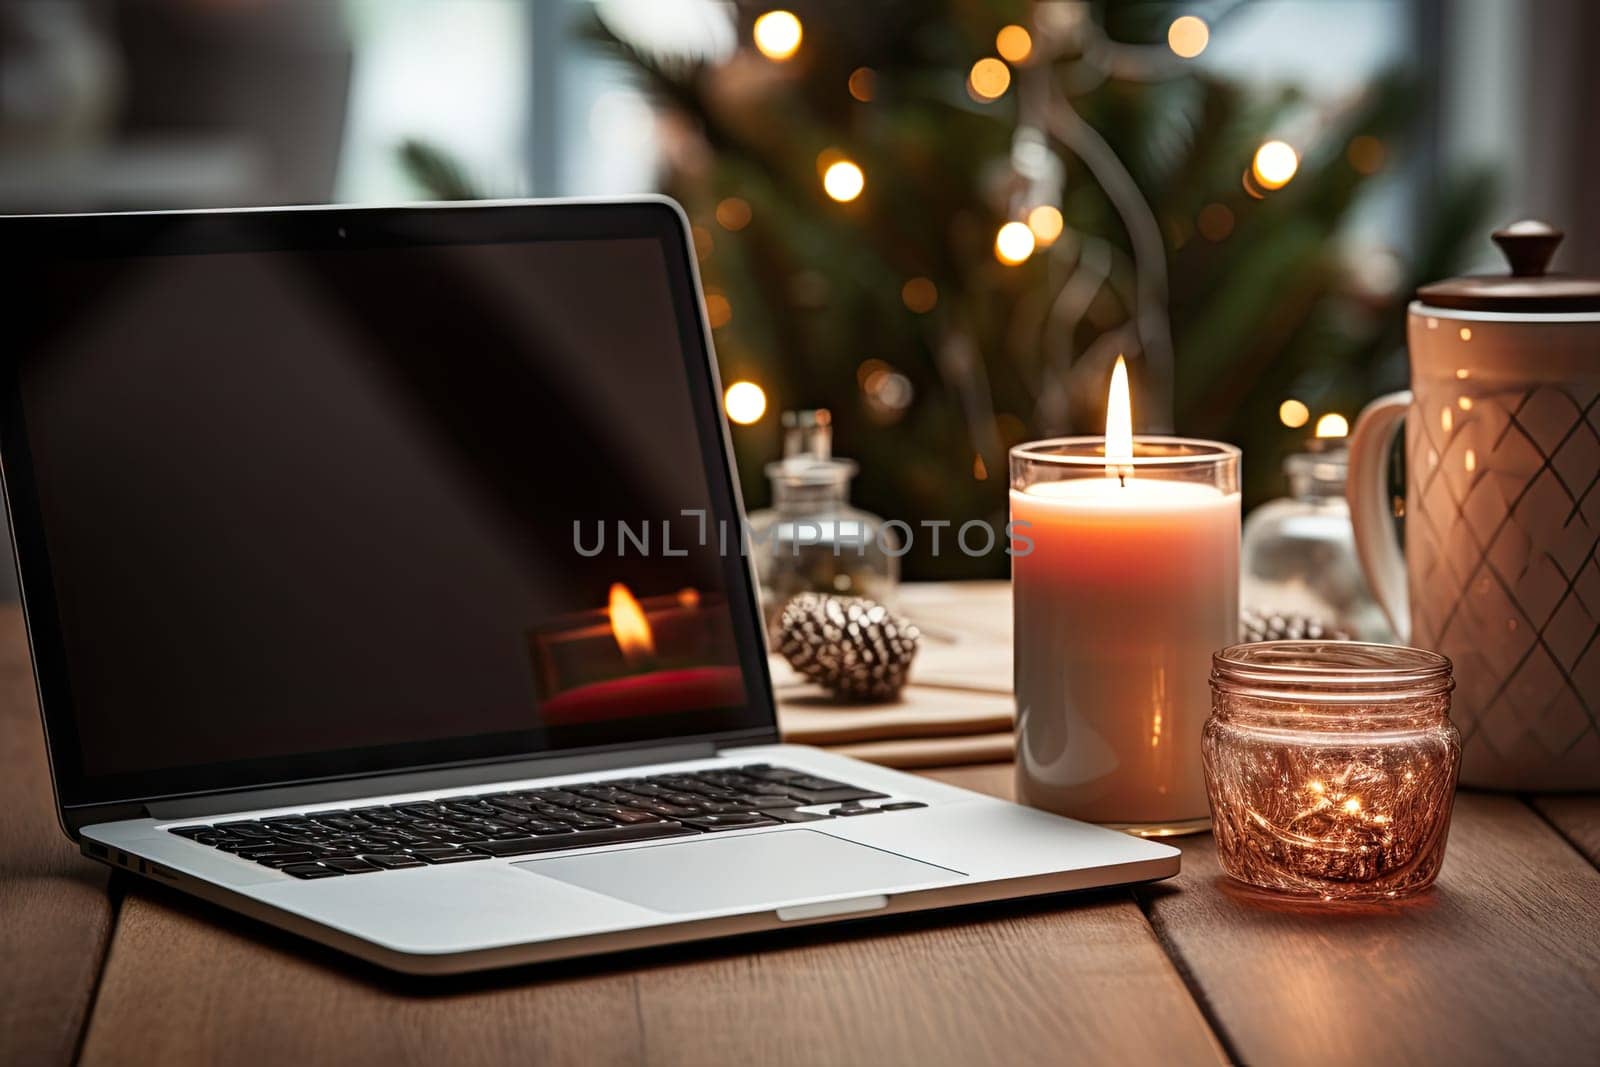 a laptop computer on a wooden table with candles and christmas lights in the window behind it is a lit candle